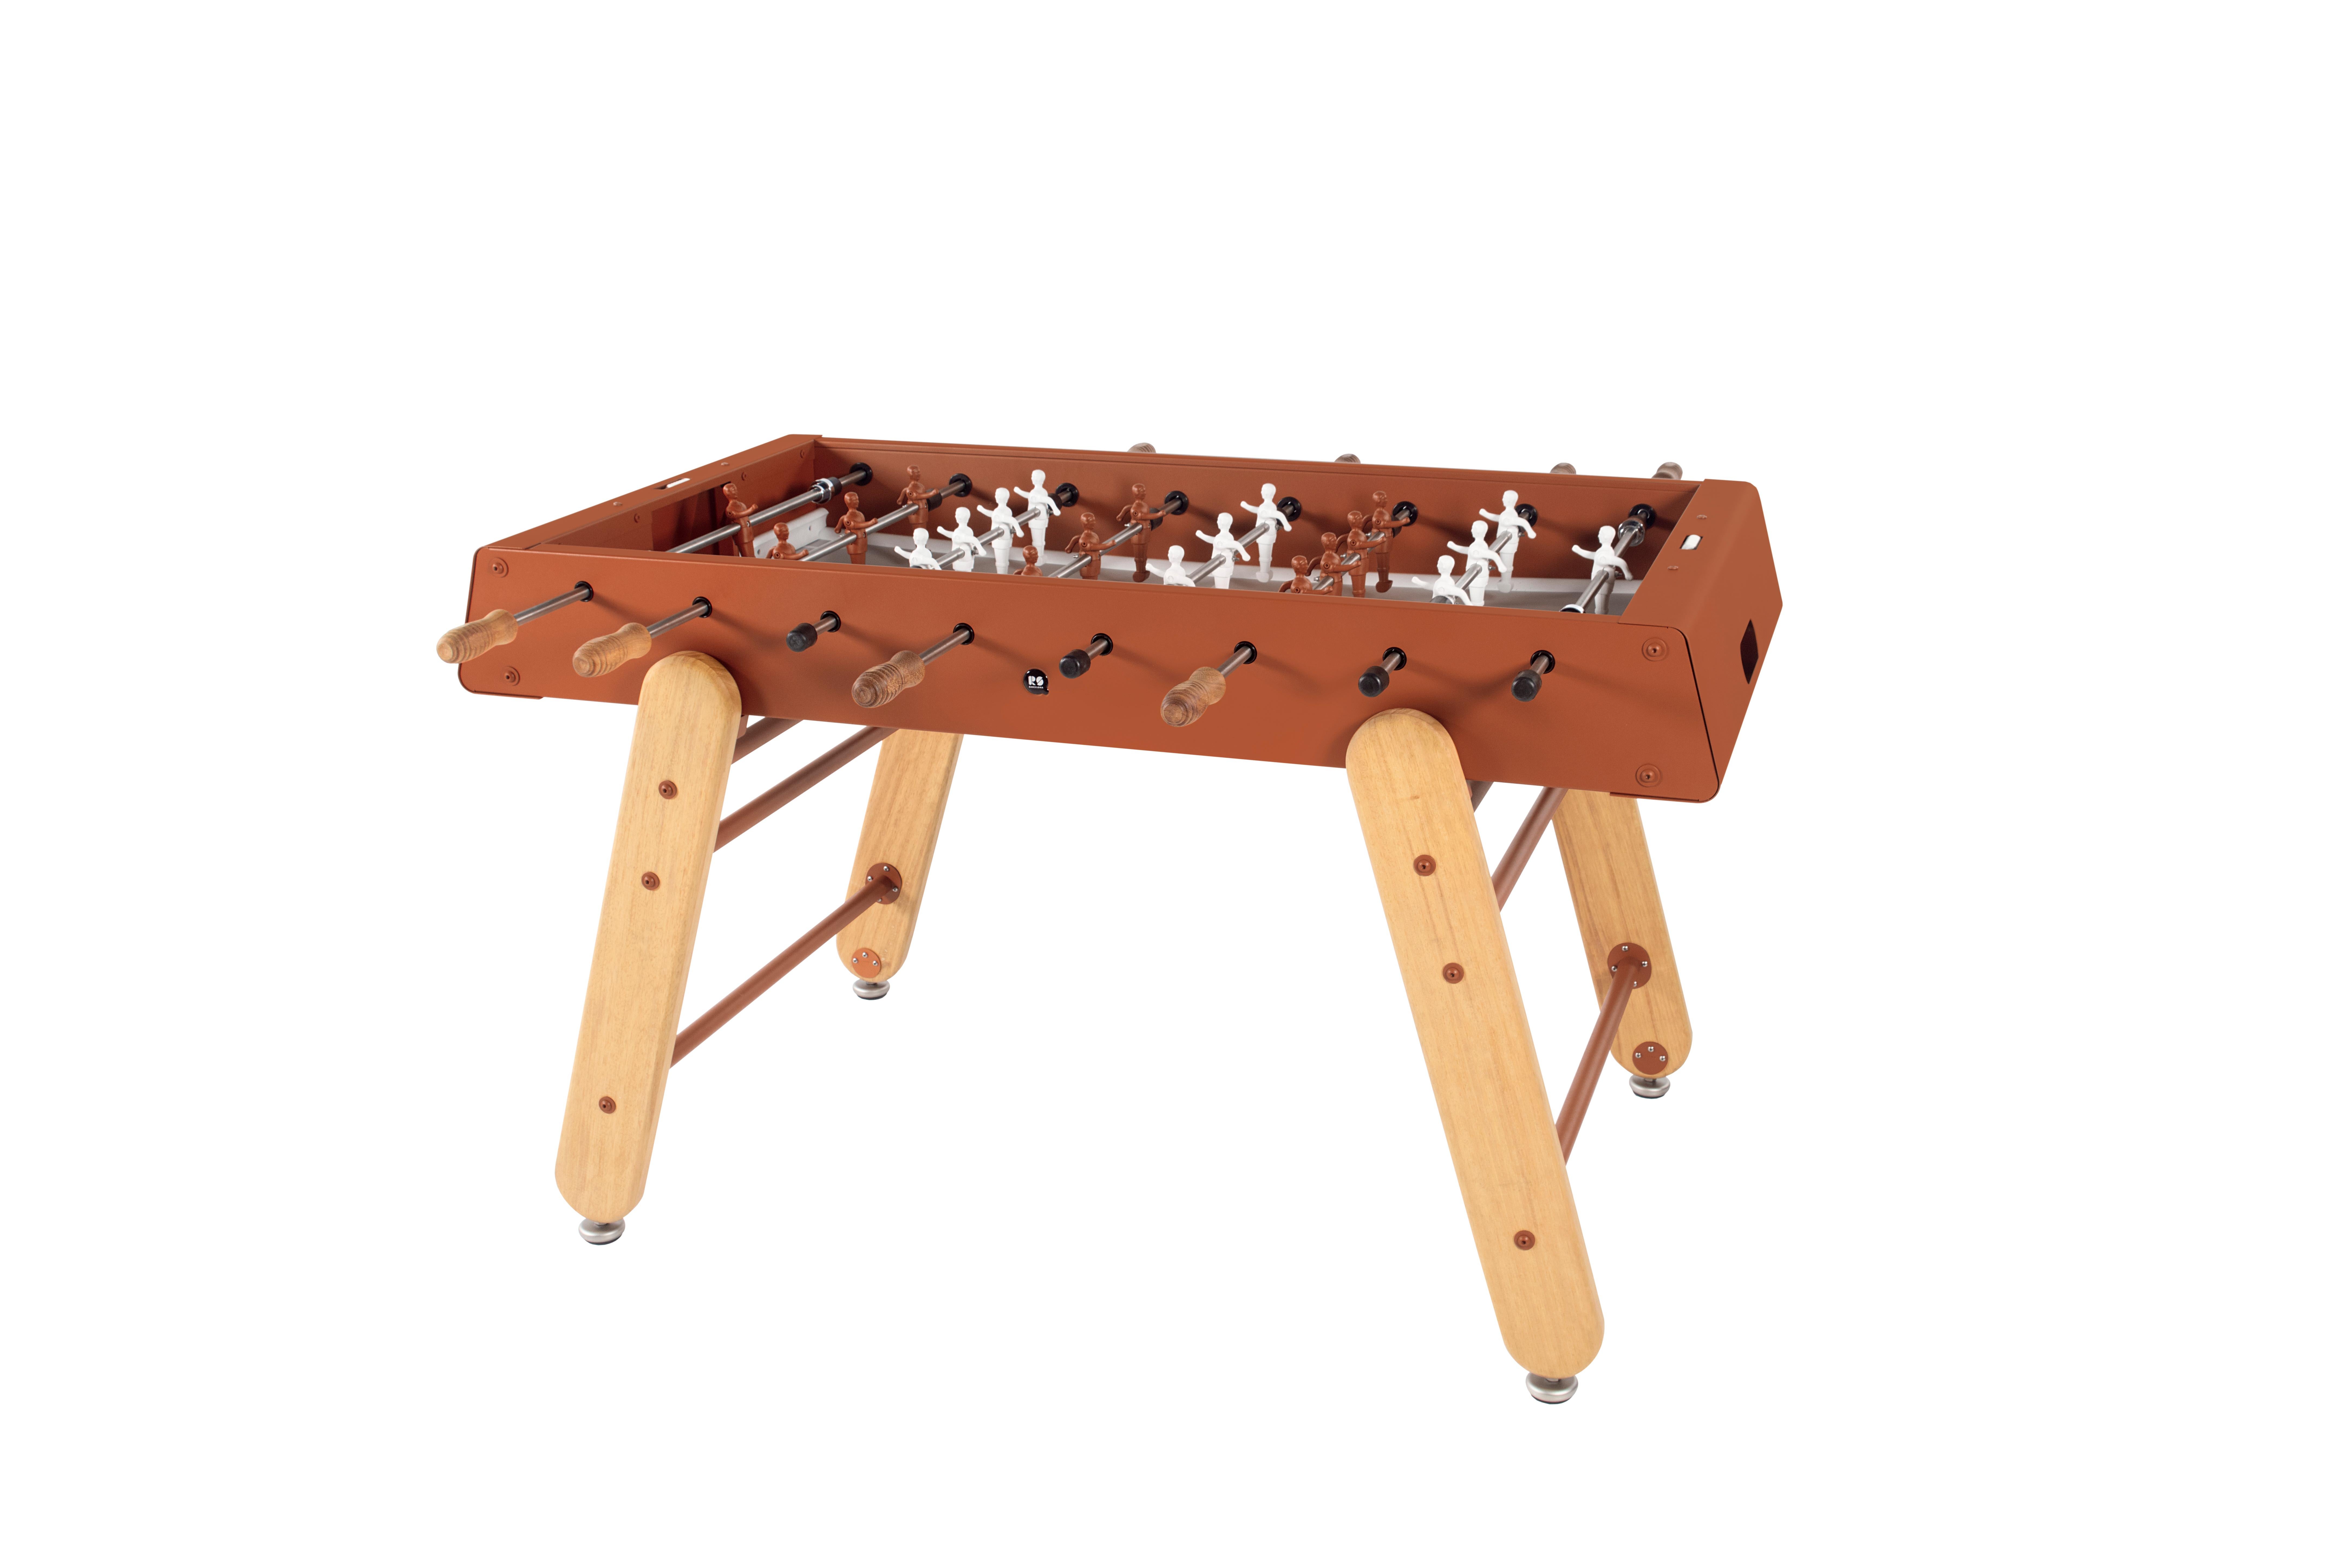 The RS4 Home football table has been designed to enjoy at home, with family and friends. For all ages. For sharing. For any moment. For doing it yourself and then, when the match starts, you set the rules of the game. This is a full sized foosball